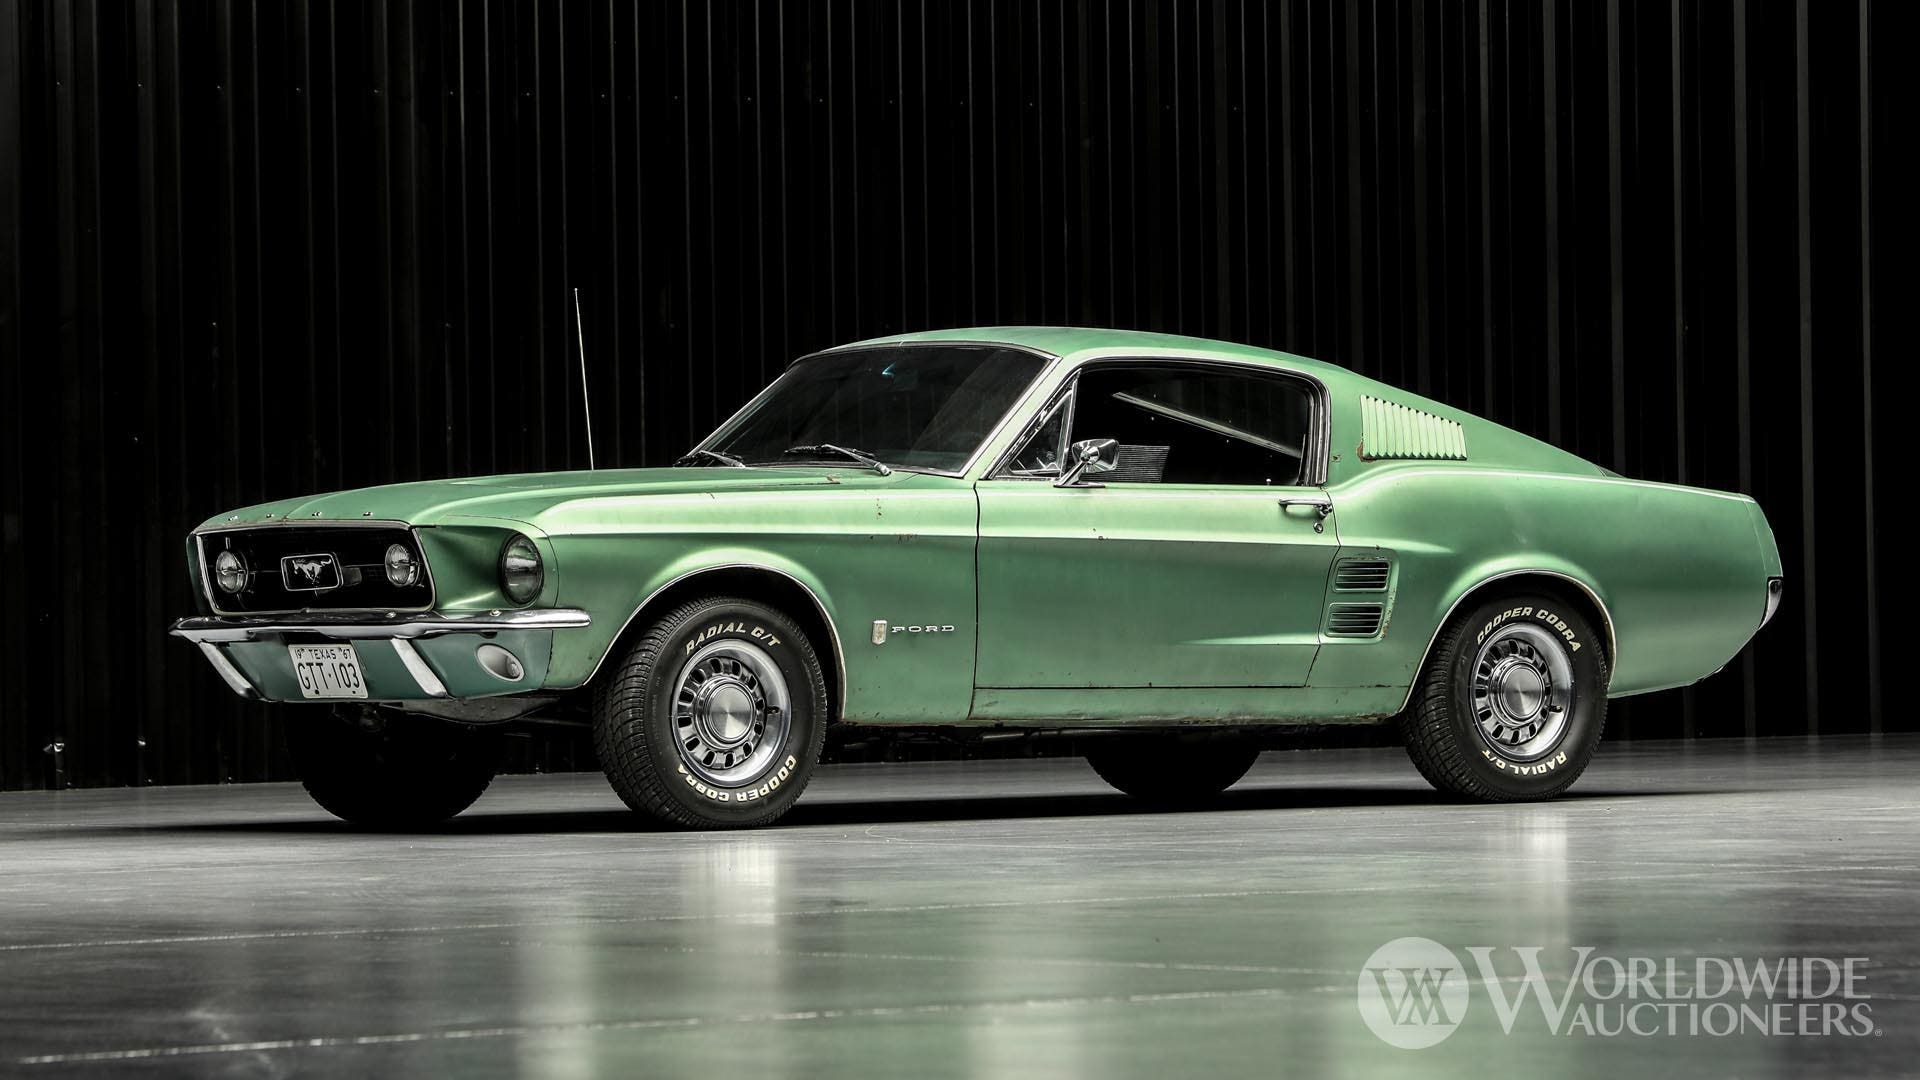 Rare 'Vietnam' 1967 Ford Mustang auctioned to raise money for veterans